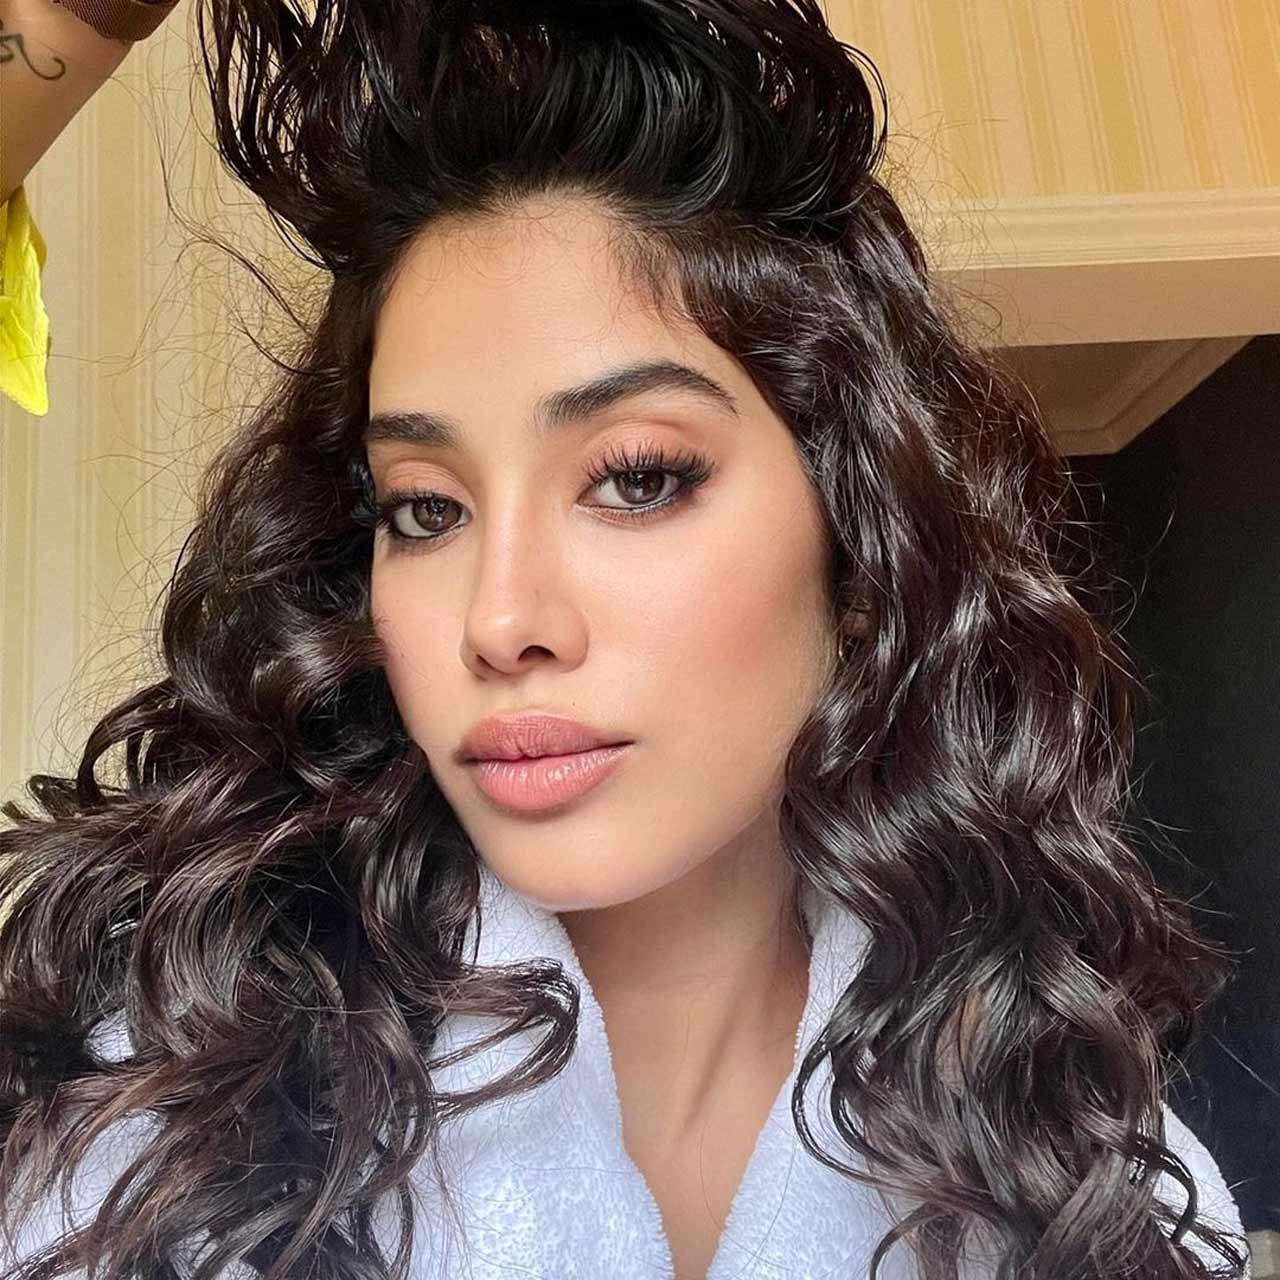 Varun Dhawan and Janhvi Kapoor have been shooting for 'Bawaal' in Europe for the last two months. The duo has shot in multiple European locations including Paris and Amsterdam, and are at present in Poland for the last leg of the shoot